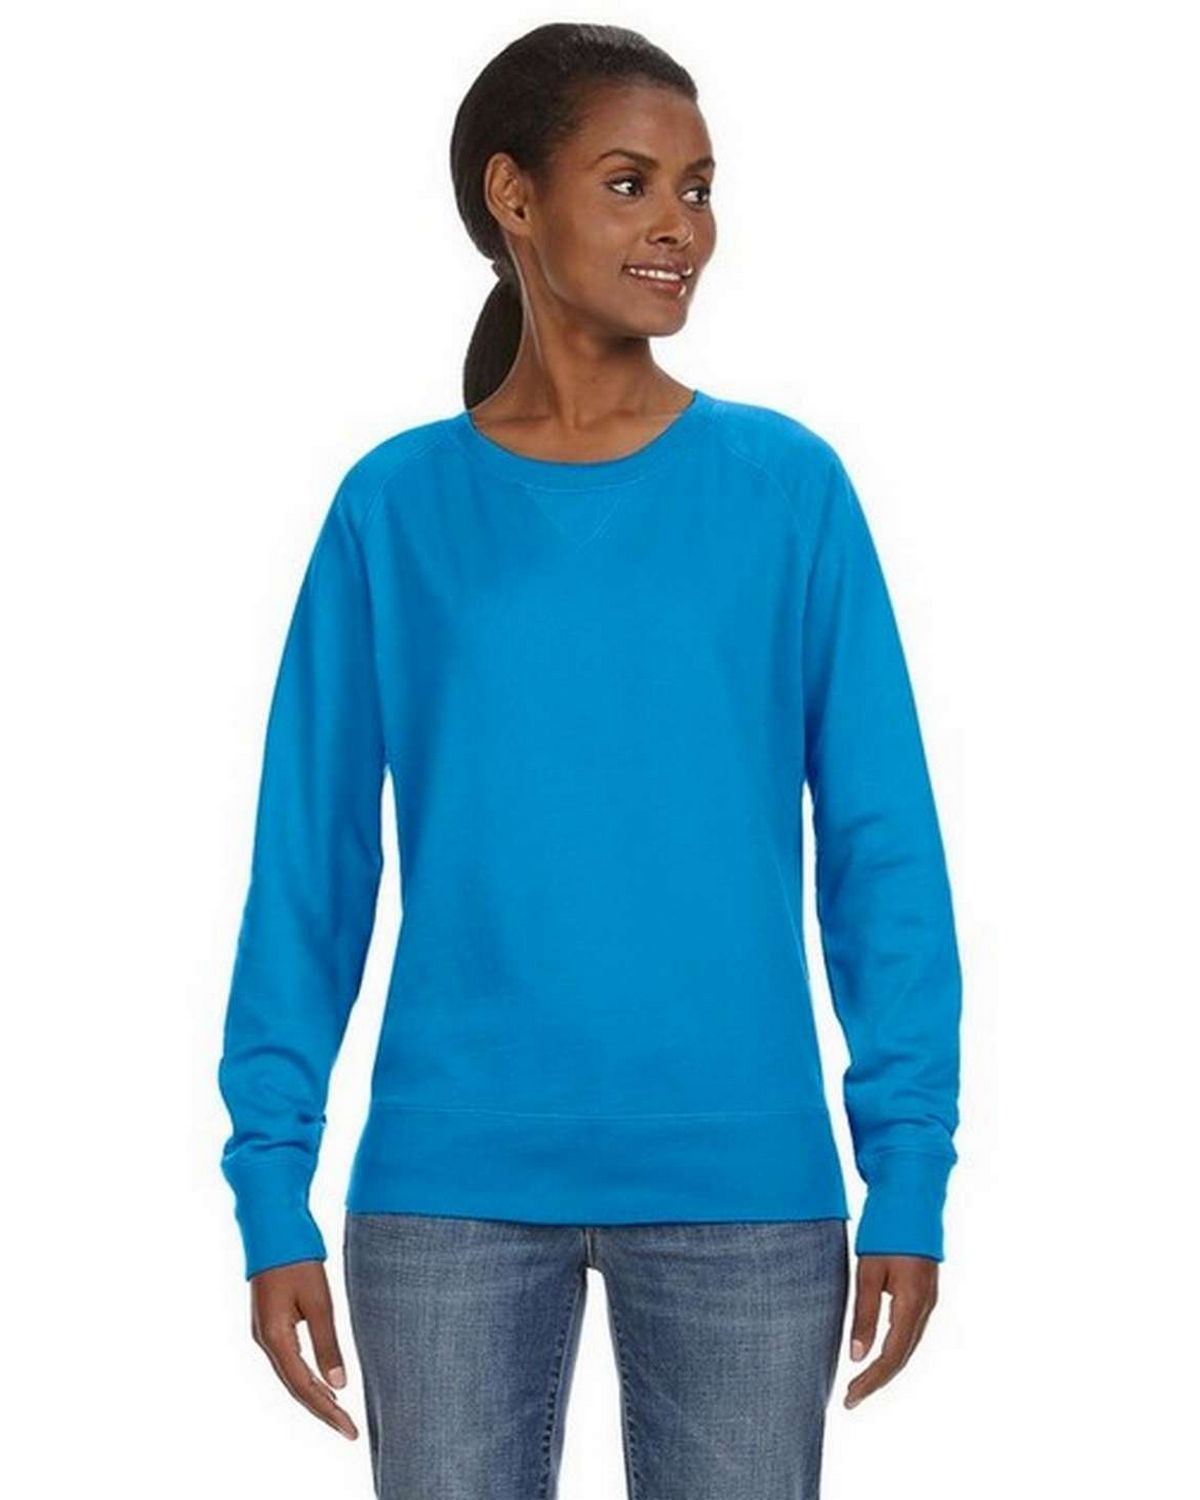 LAT 3762 Ladies Slouchy Pullover - Shop at ApparelnBags.com